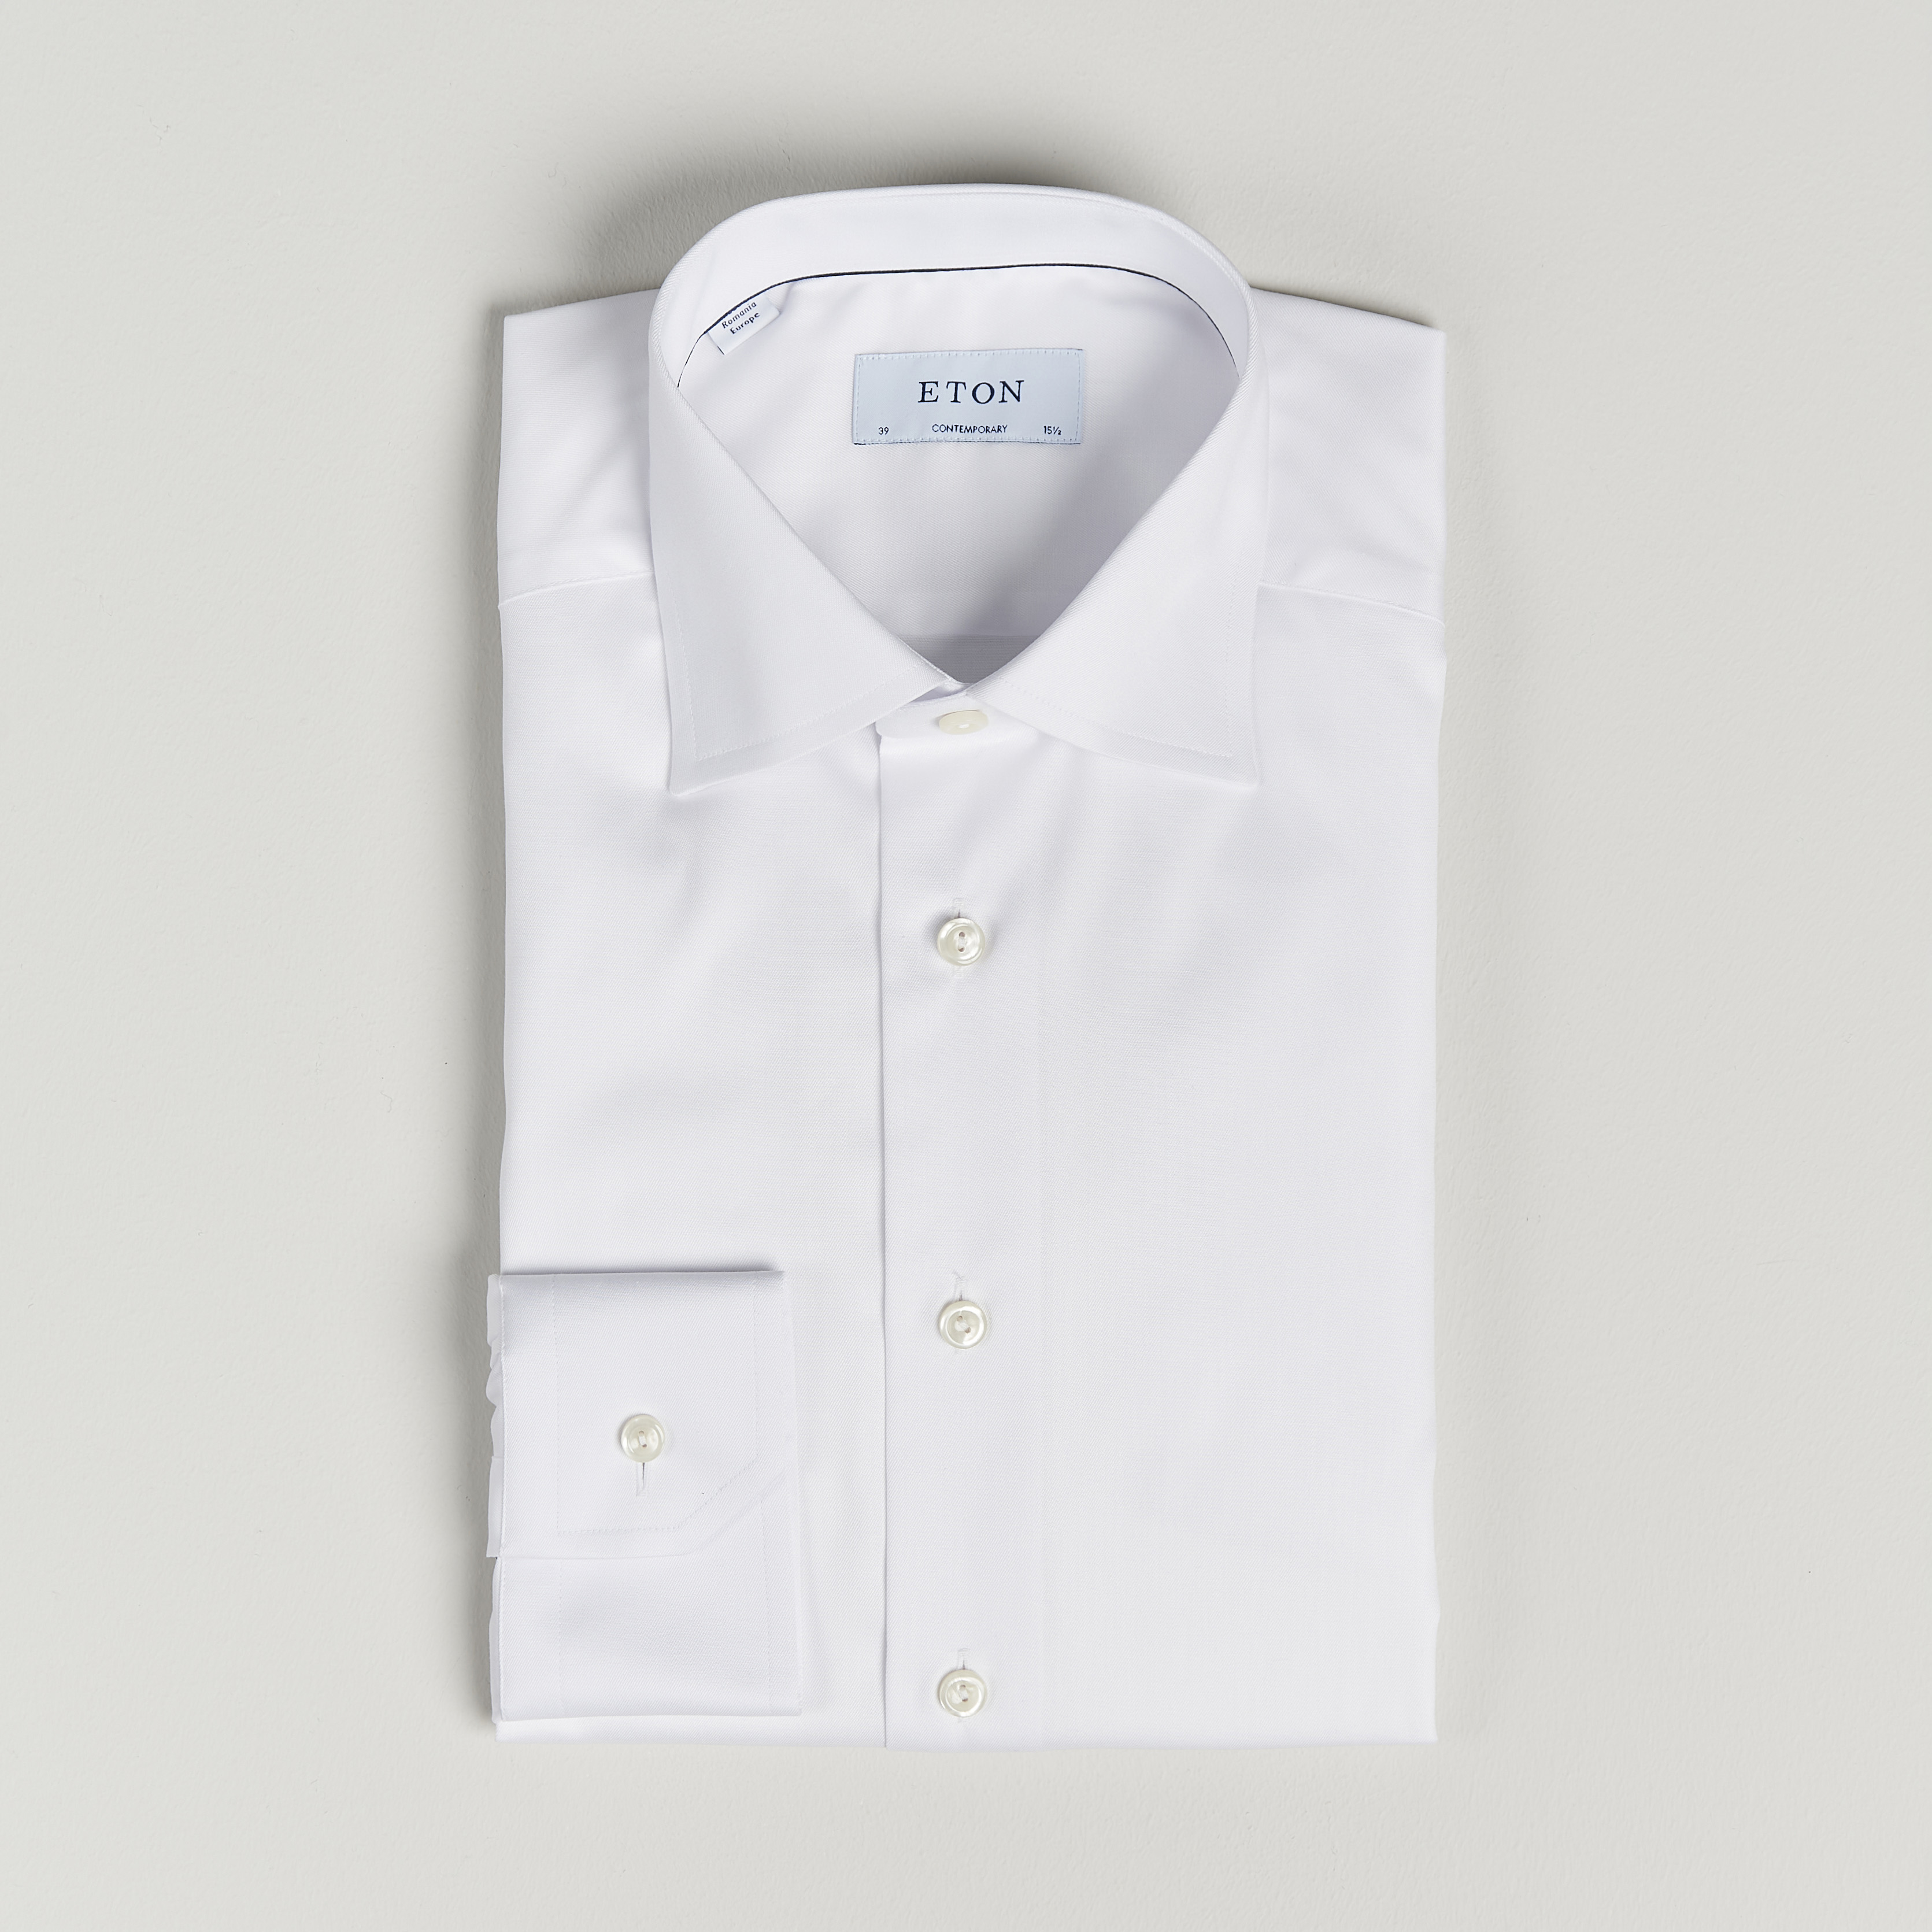 Carl Care White Fit Eton of Contemporary bei Shirt